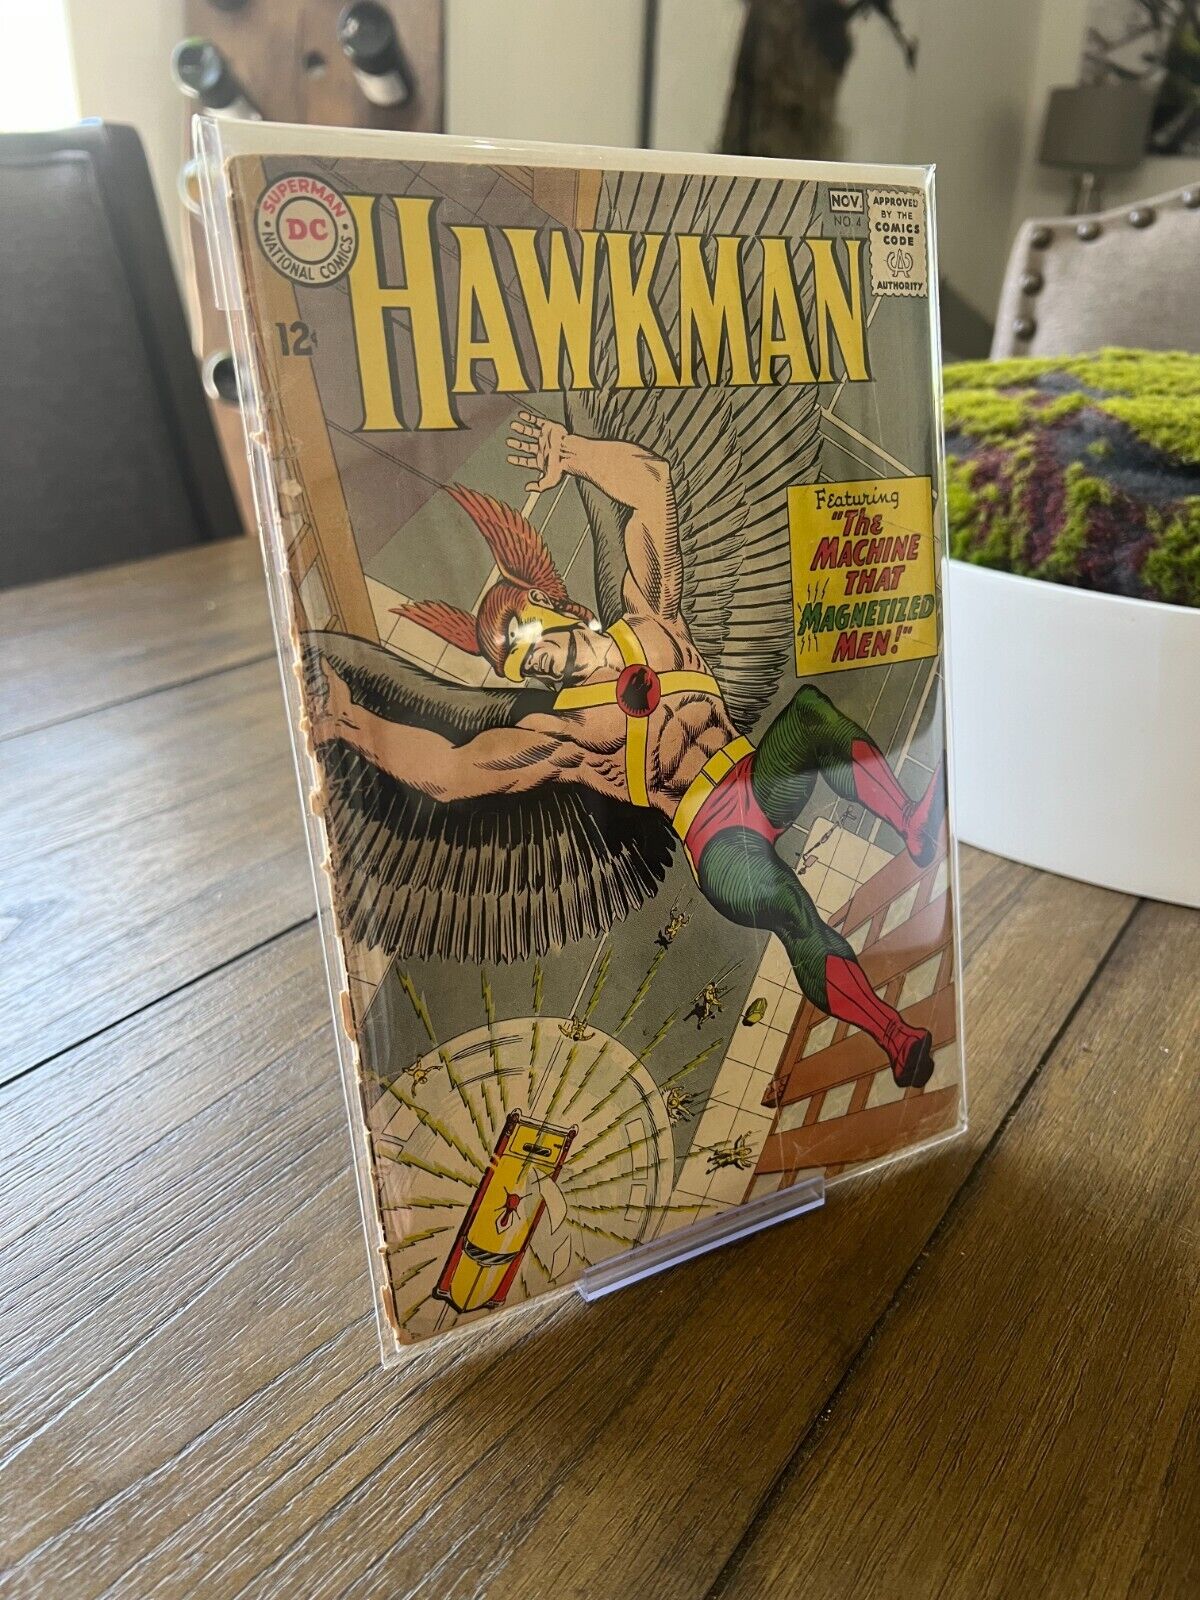 DC Hawkman #4 (Oct Nov 1964) 1st Zatanna - See Pictures for condition